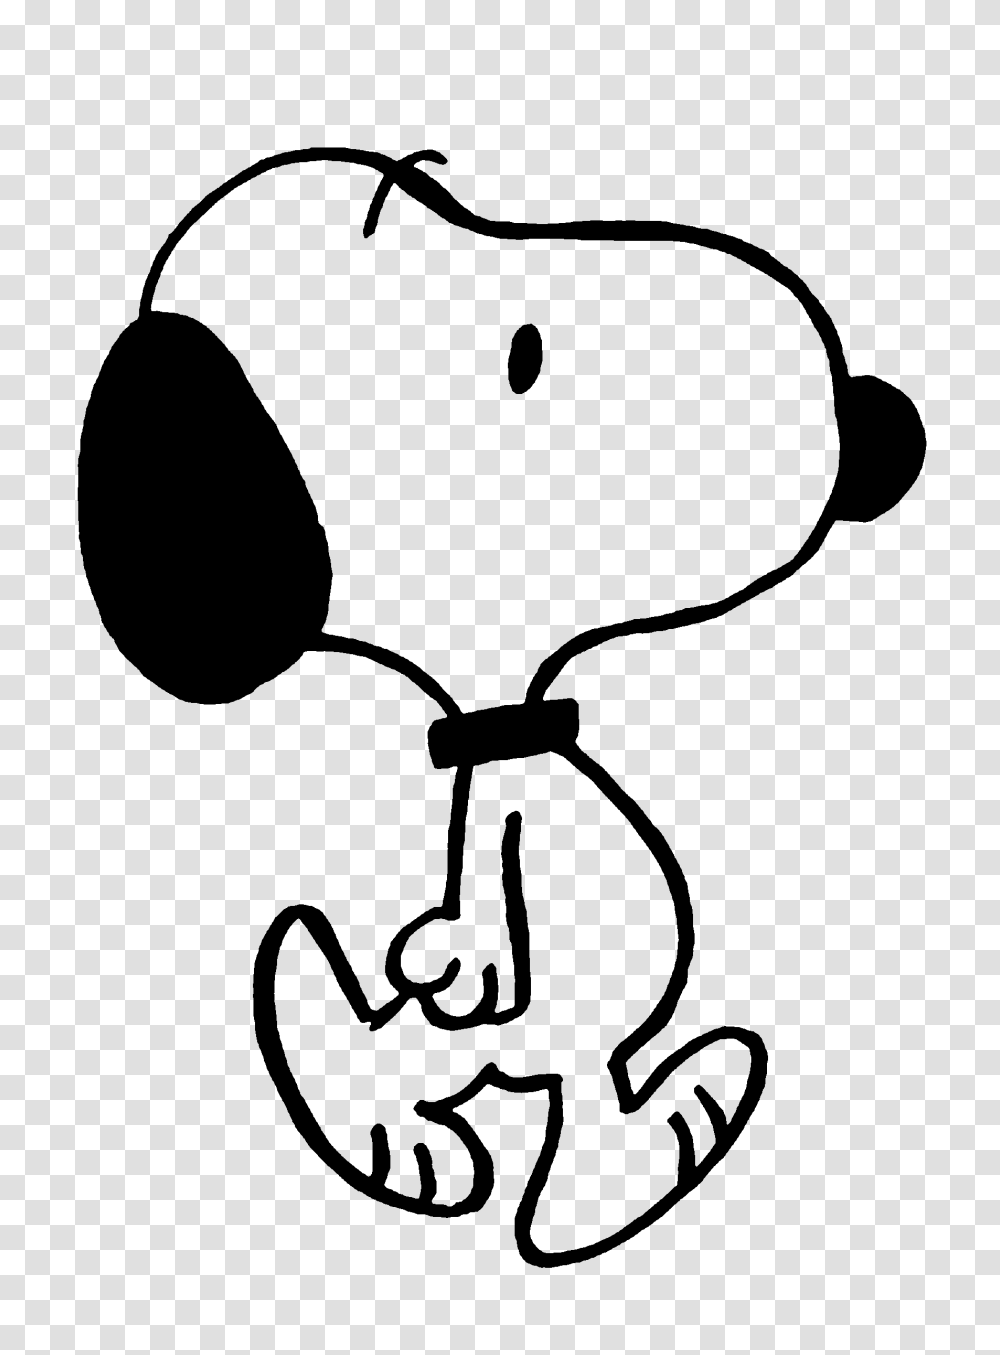 Hd Wallpapers Snoopy Black And White Smoopy, Stencil, Silhouette, Lawn Mower, Tool Transparent Png